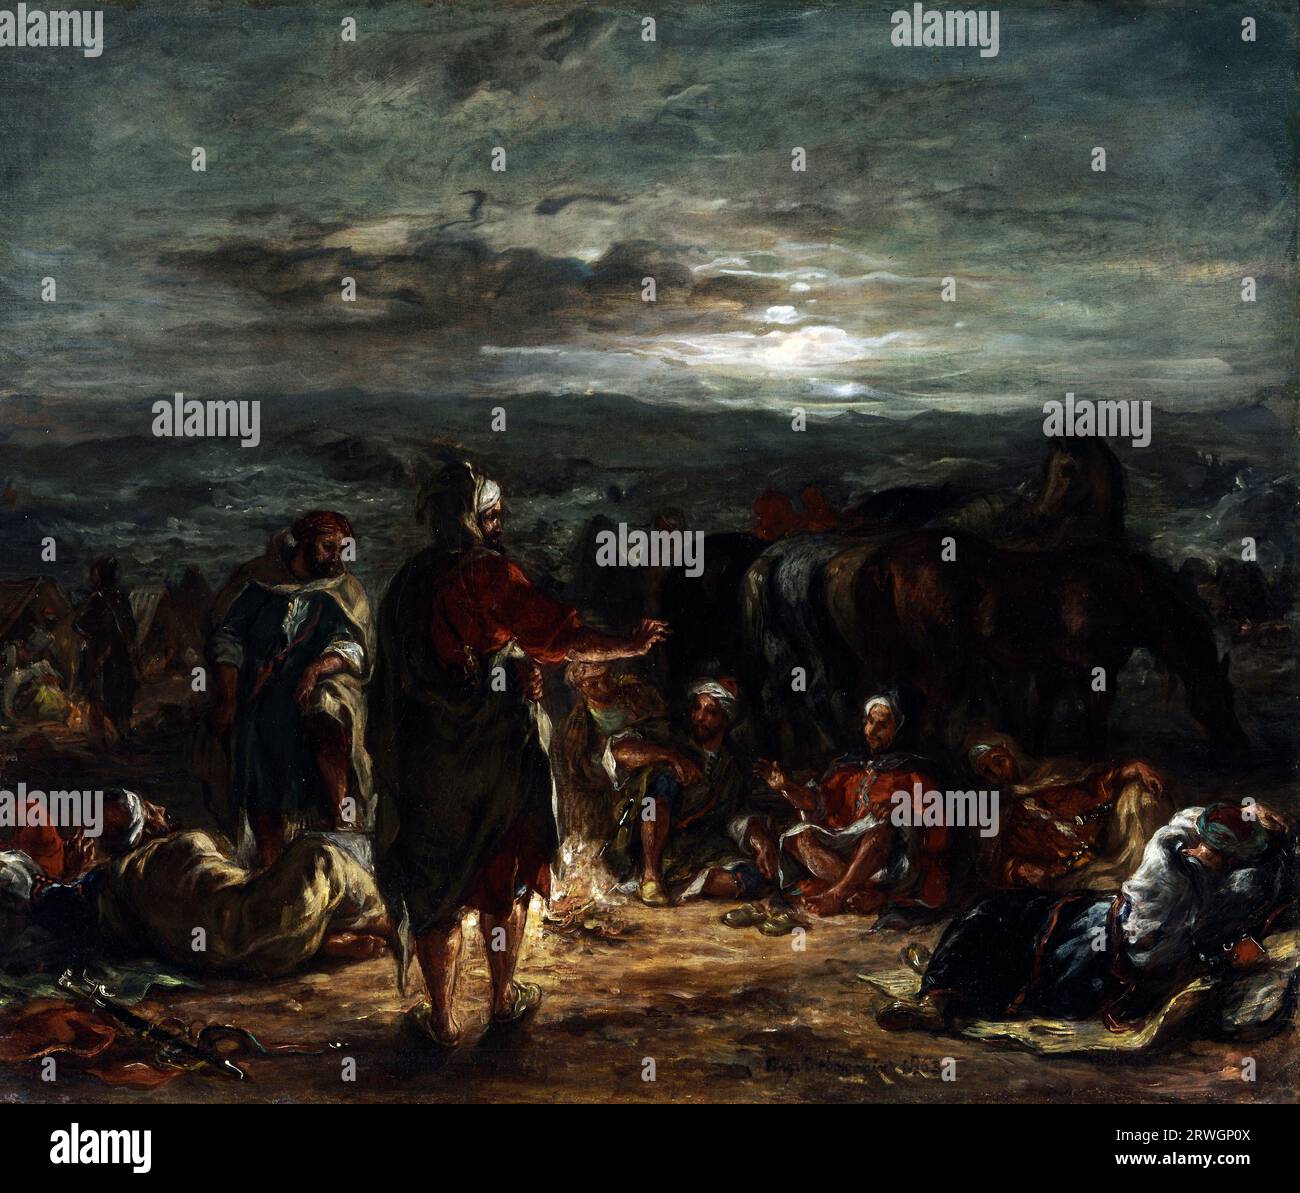 An Arab Camp at Night by Eugène Delacroix (1798-1863), oil on canvas, 1863 Stock Photo